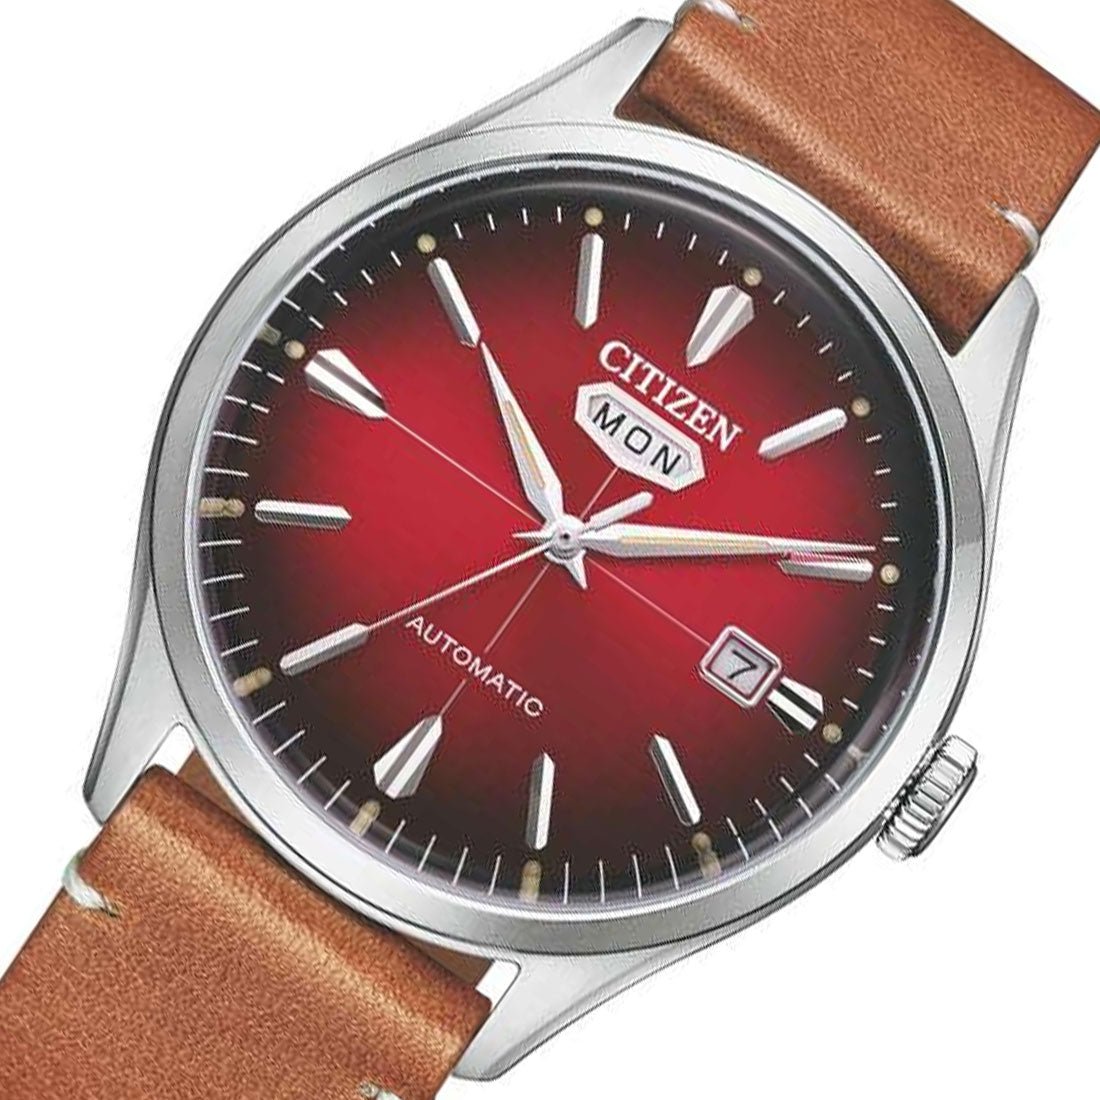 NH8390-11X Citizen C7 Automatic Red Dial Male Leather Analog Casual Watch -Citizen